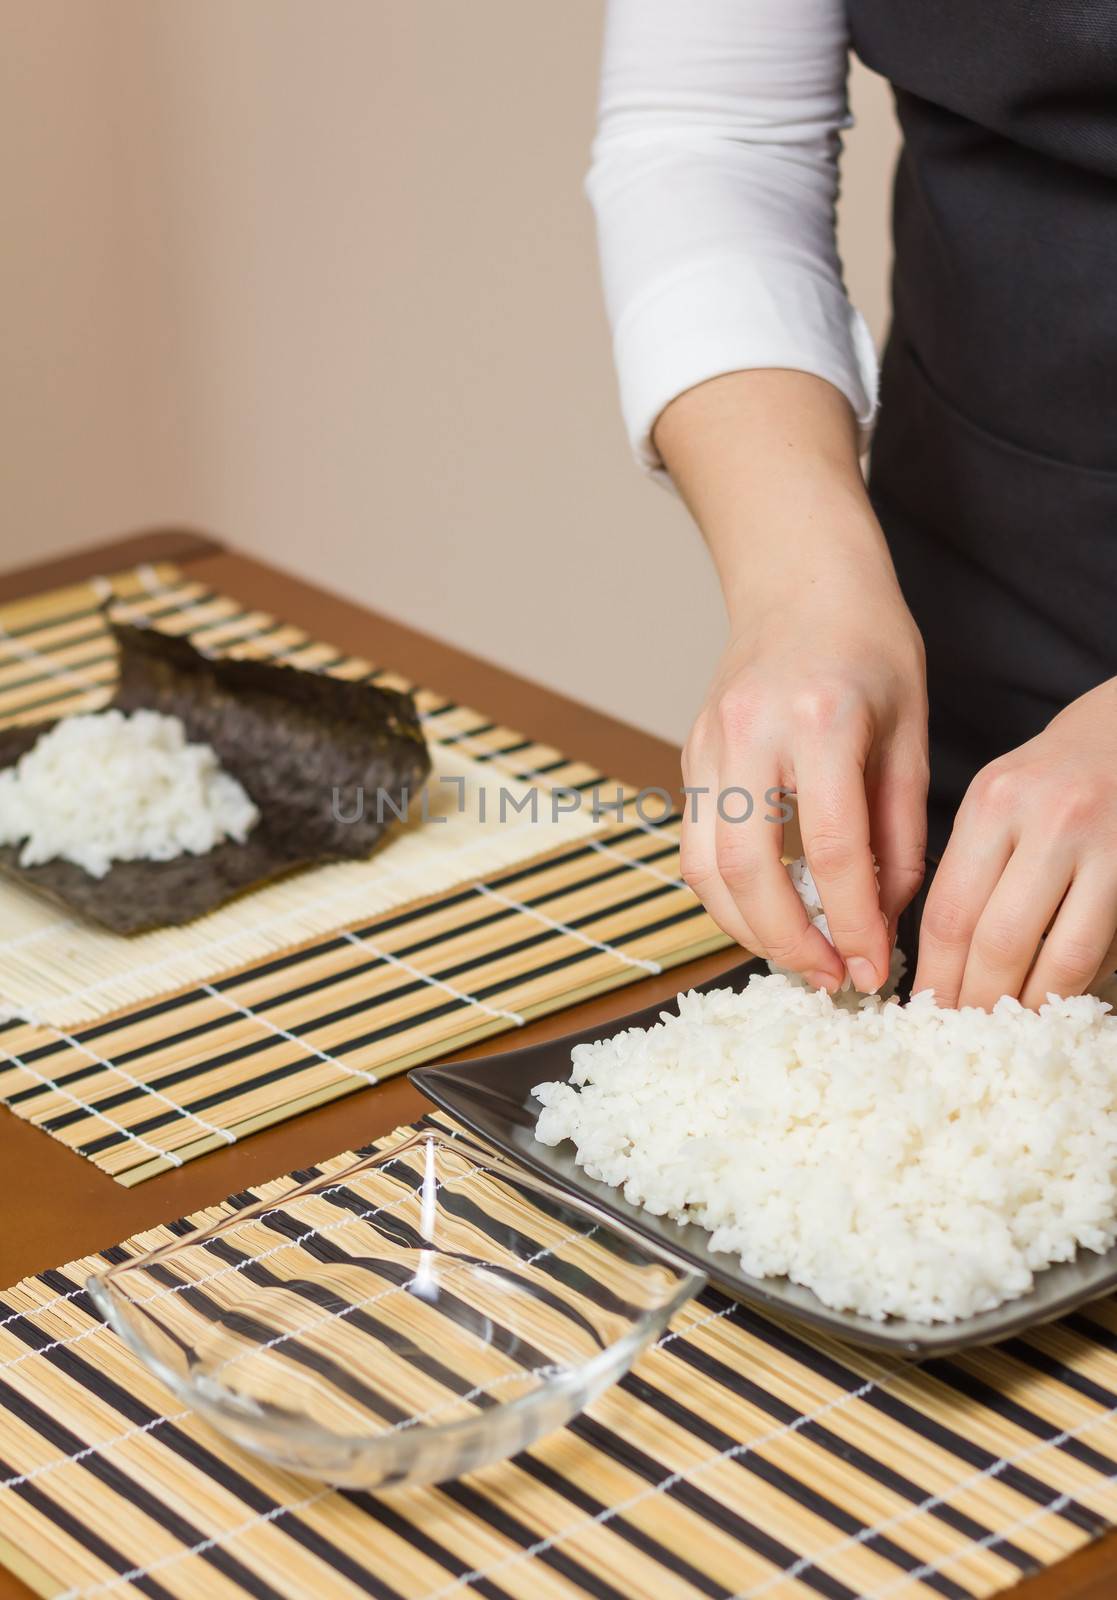 Hands of woman chef filling japanese sushi rolls with rice on a nori seaweed sheet. Selective focus on rice plate.